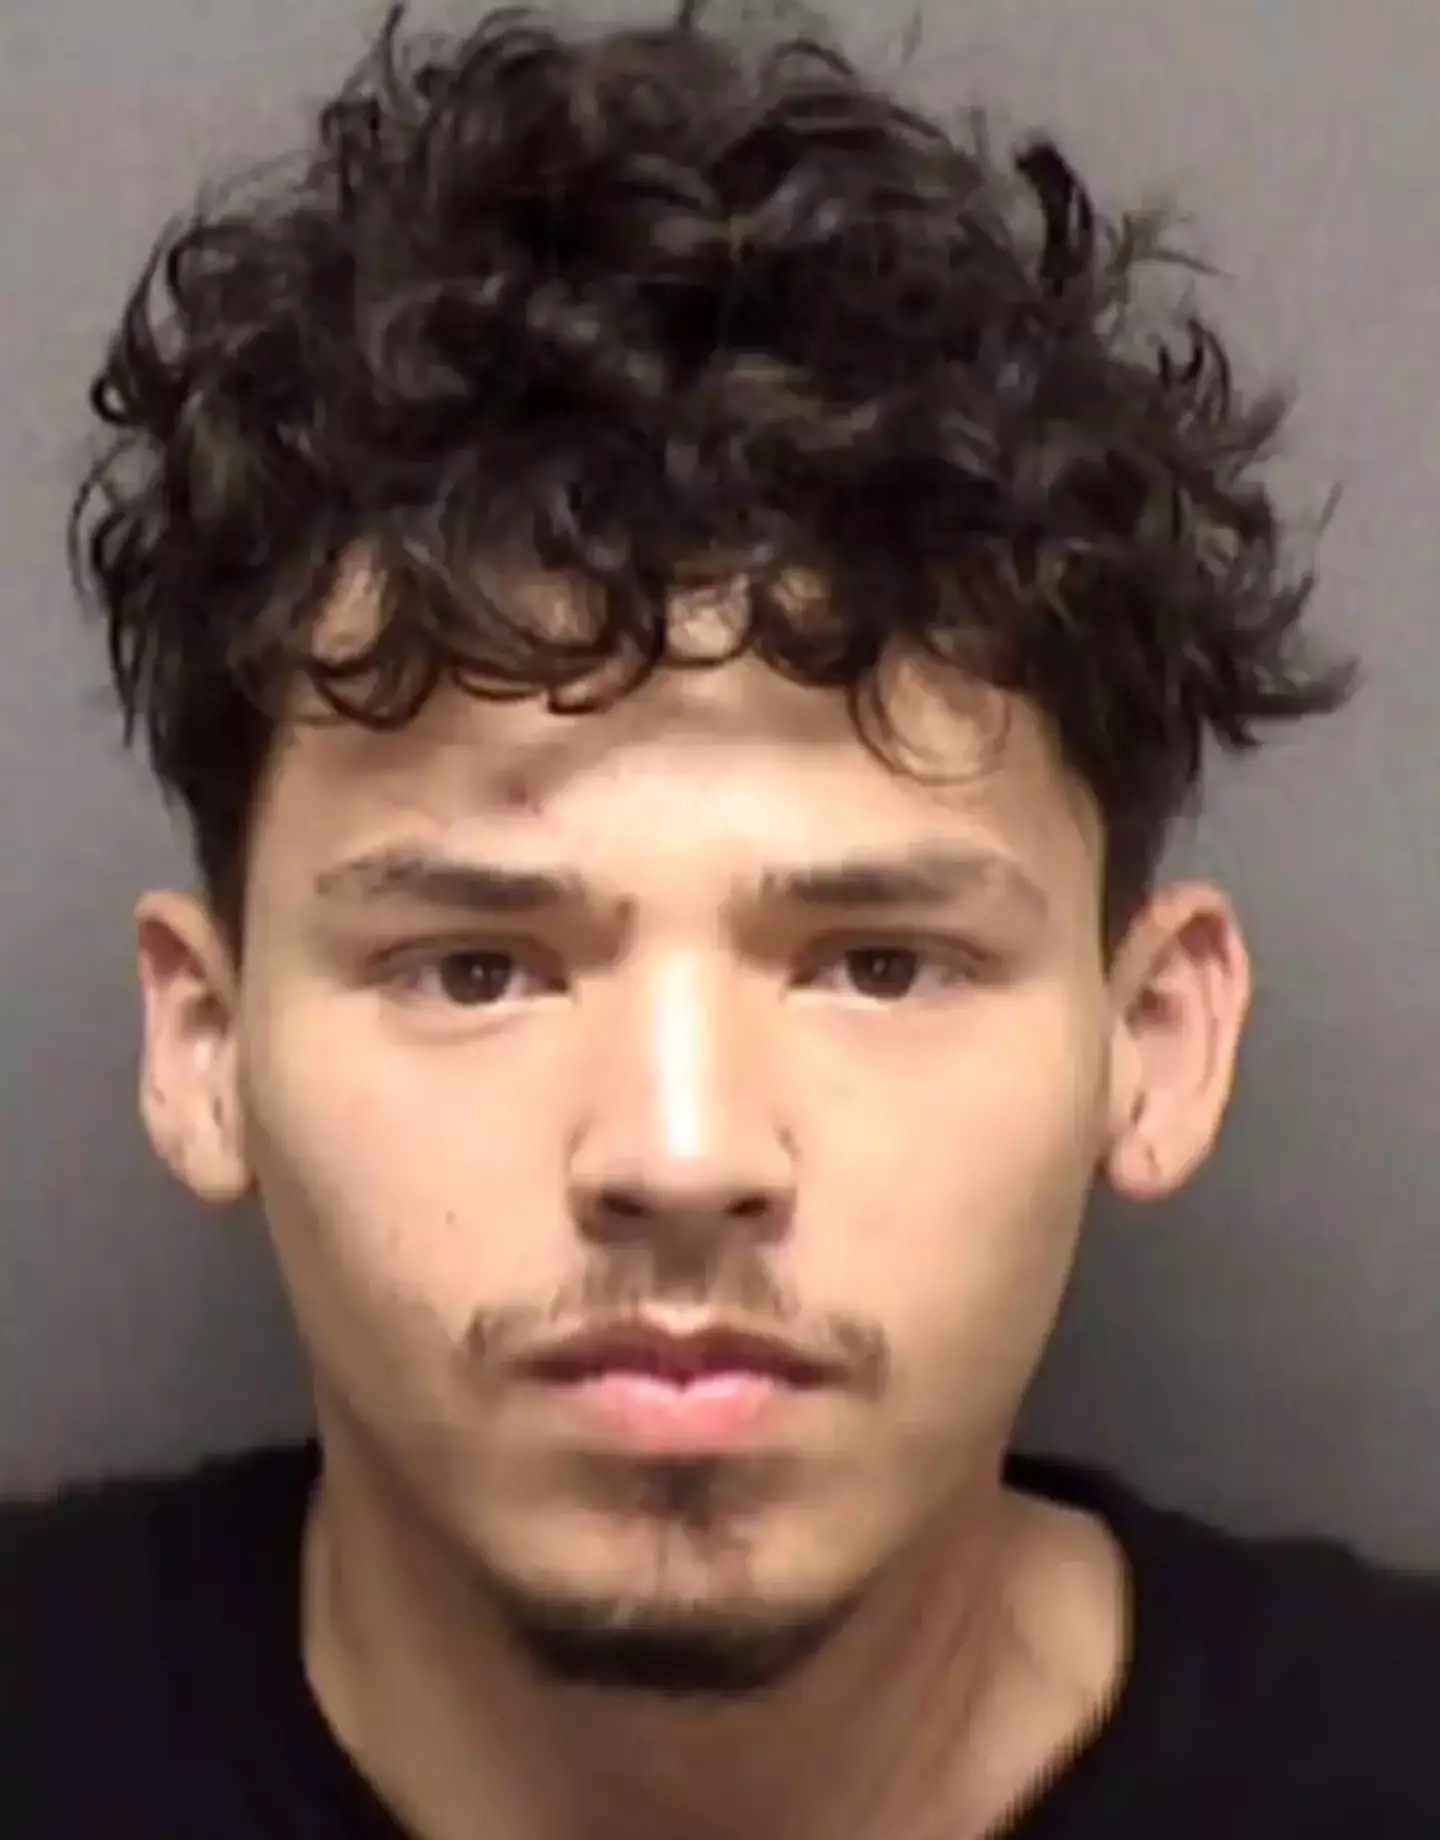 Victor Rivas has been accused of murdering Ethan Soto.